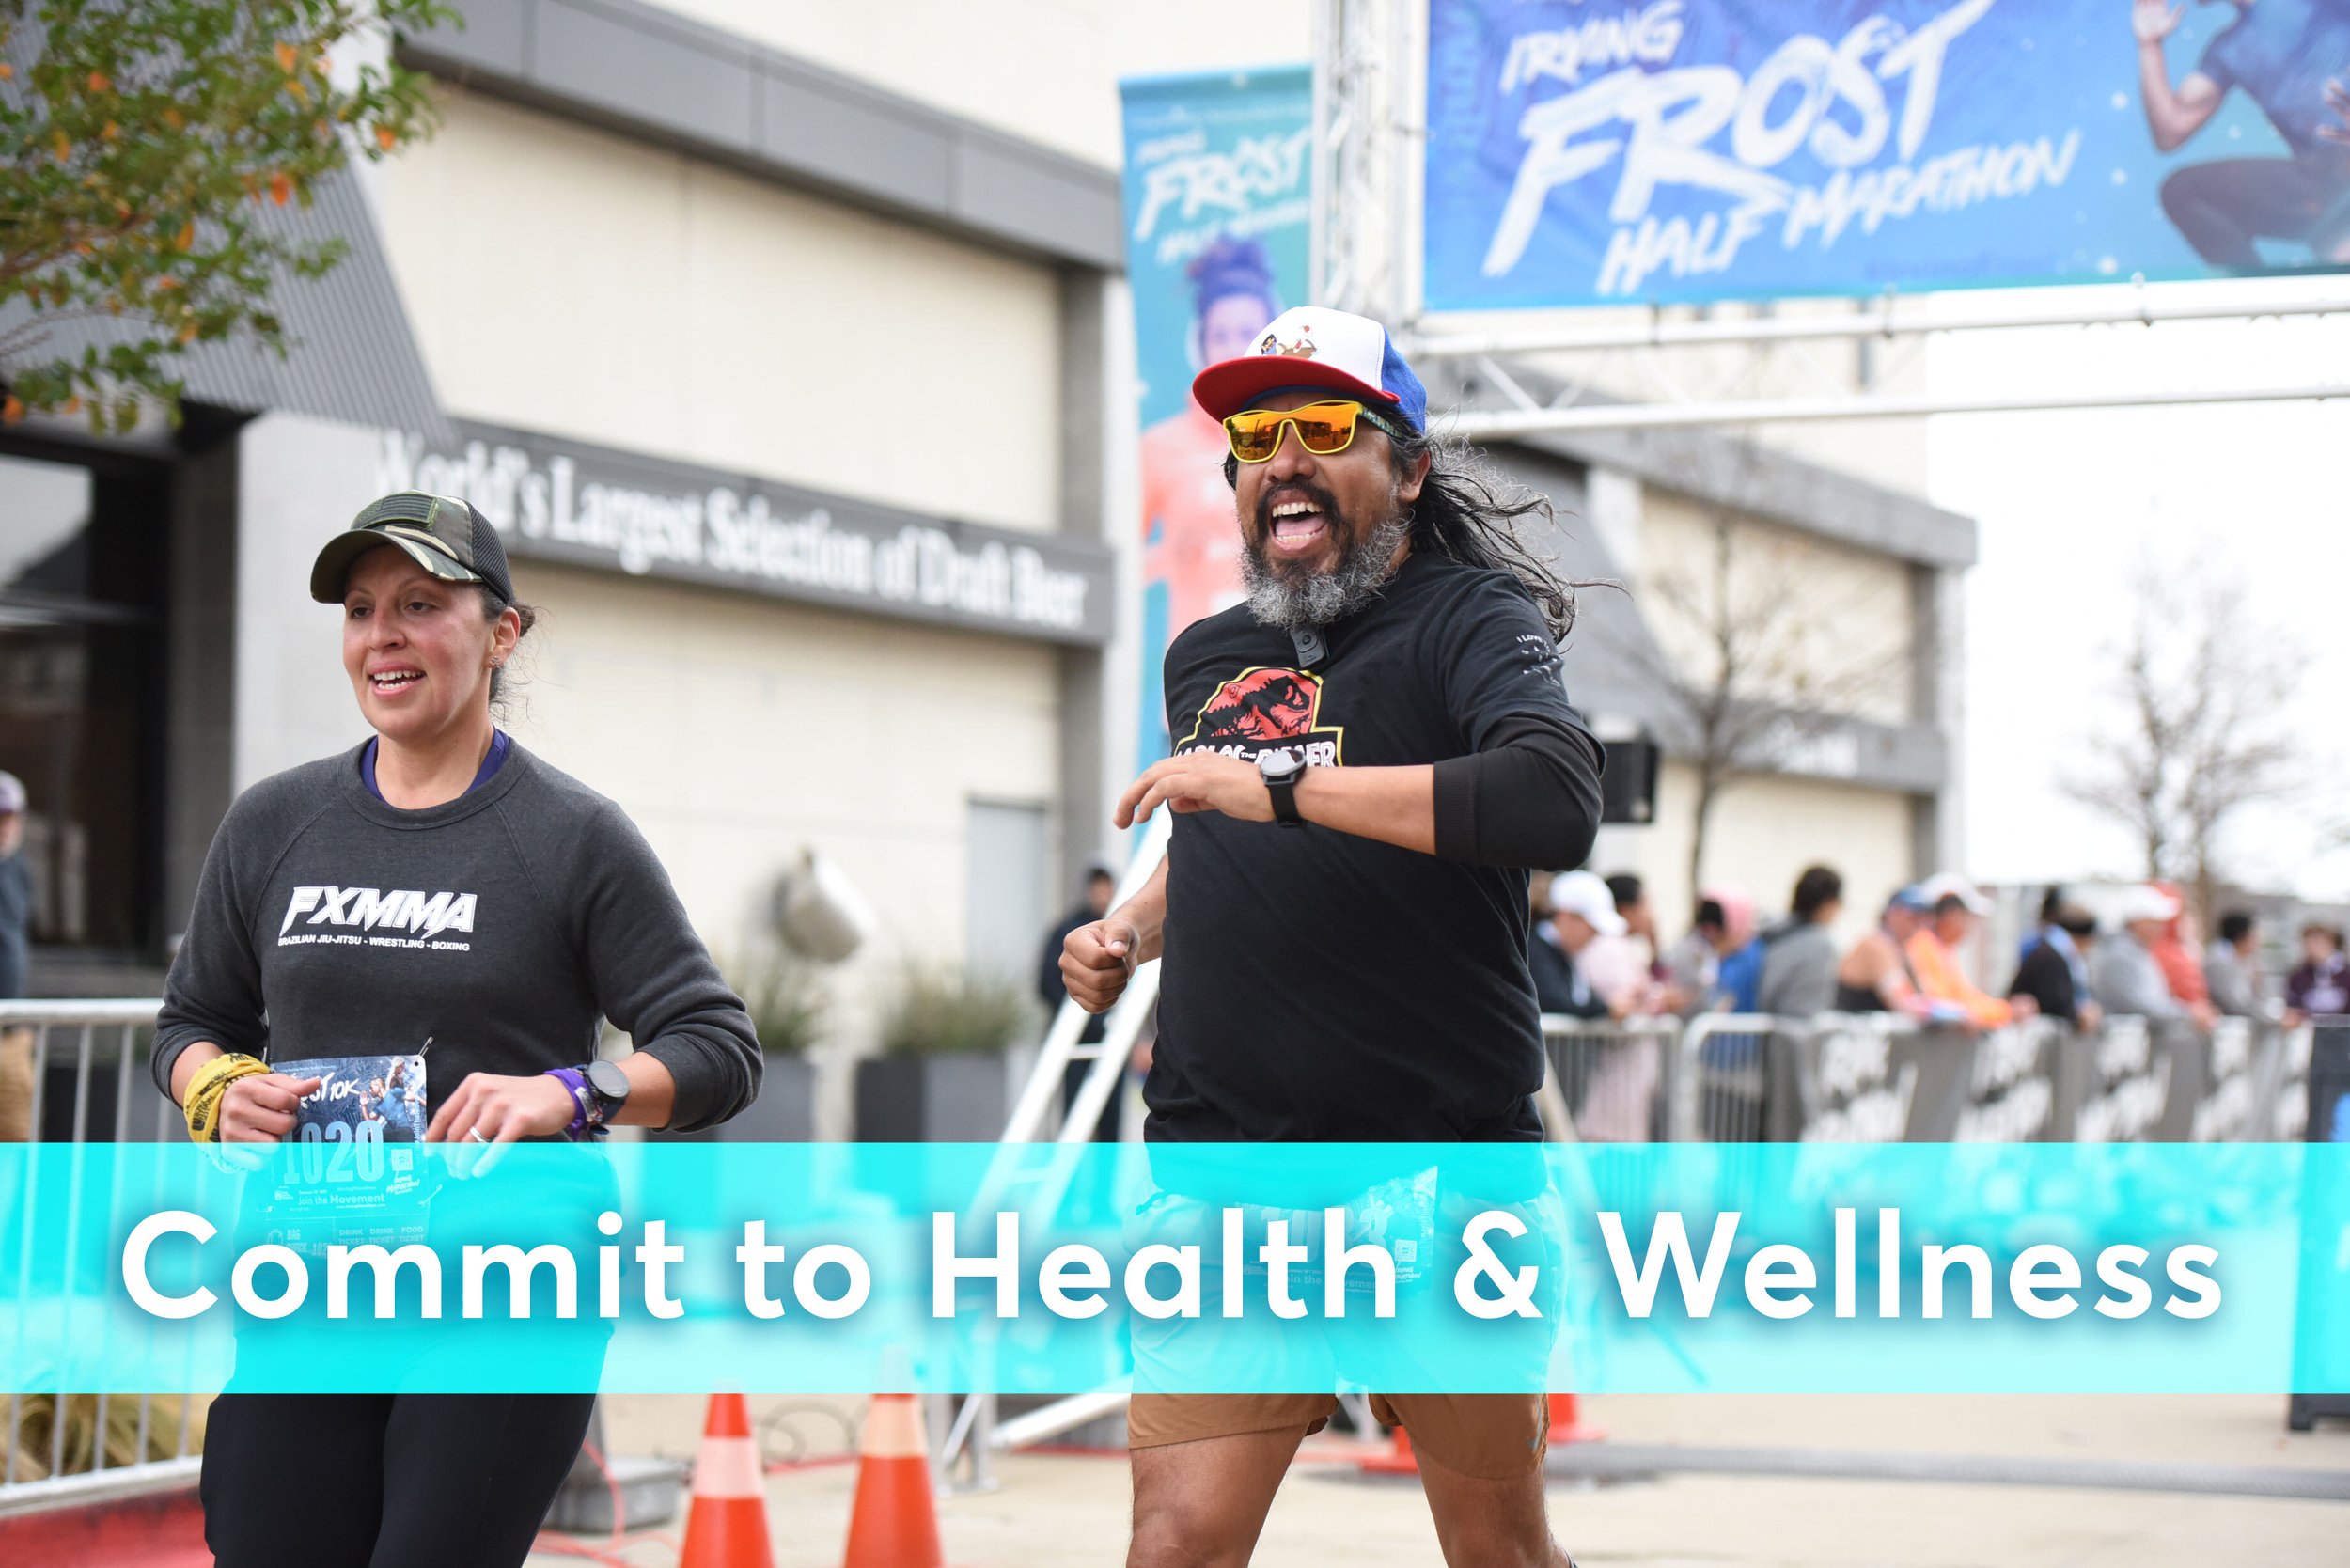 Irving-Frost-Half-Marathon-Commit-To-Health-And-Wellness.jpg